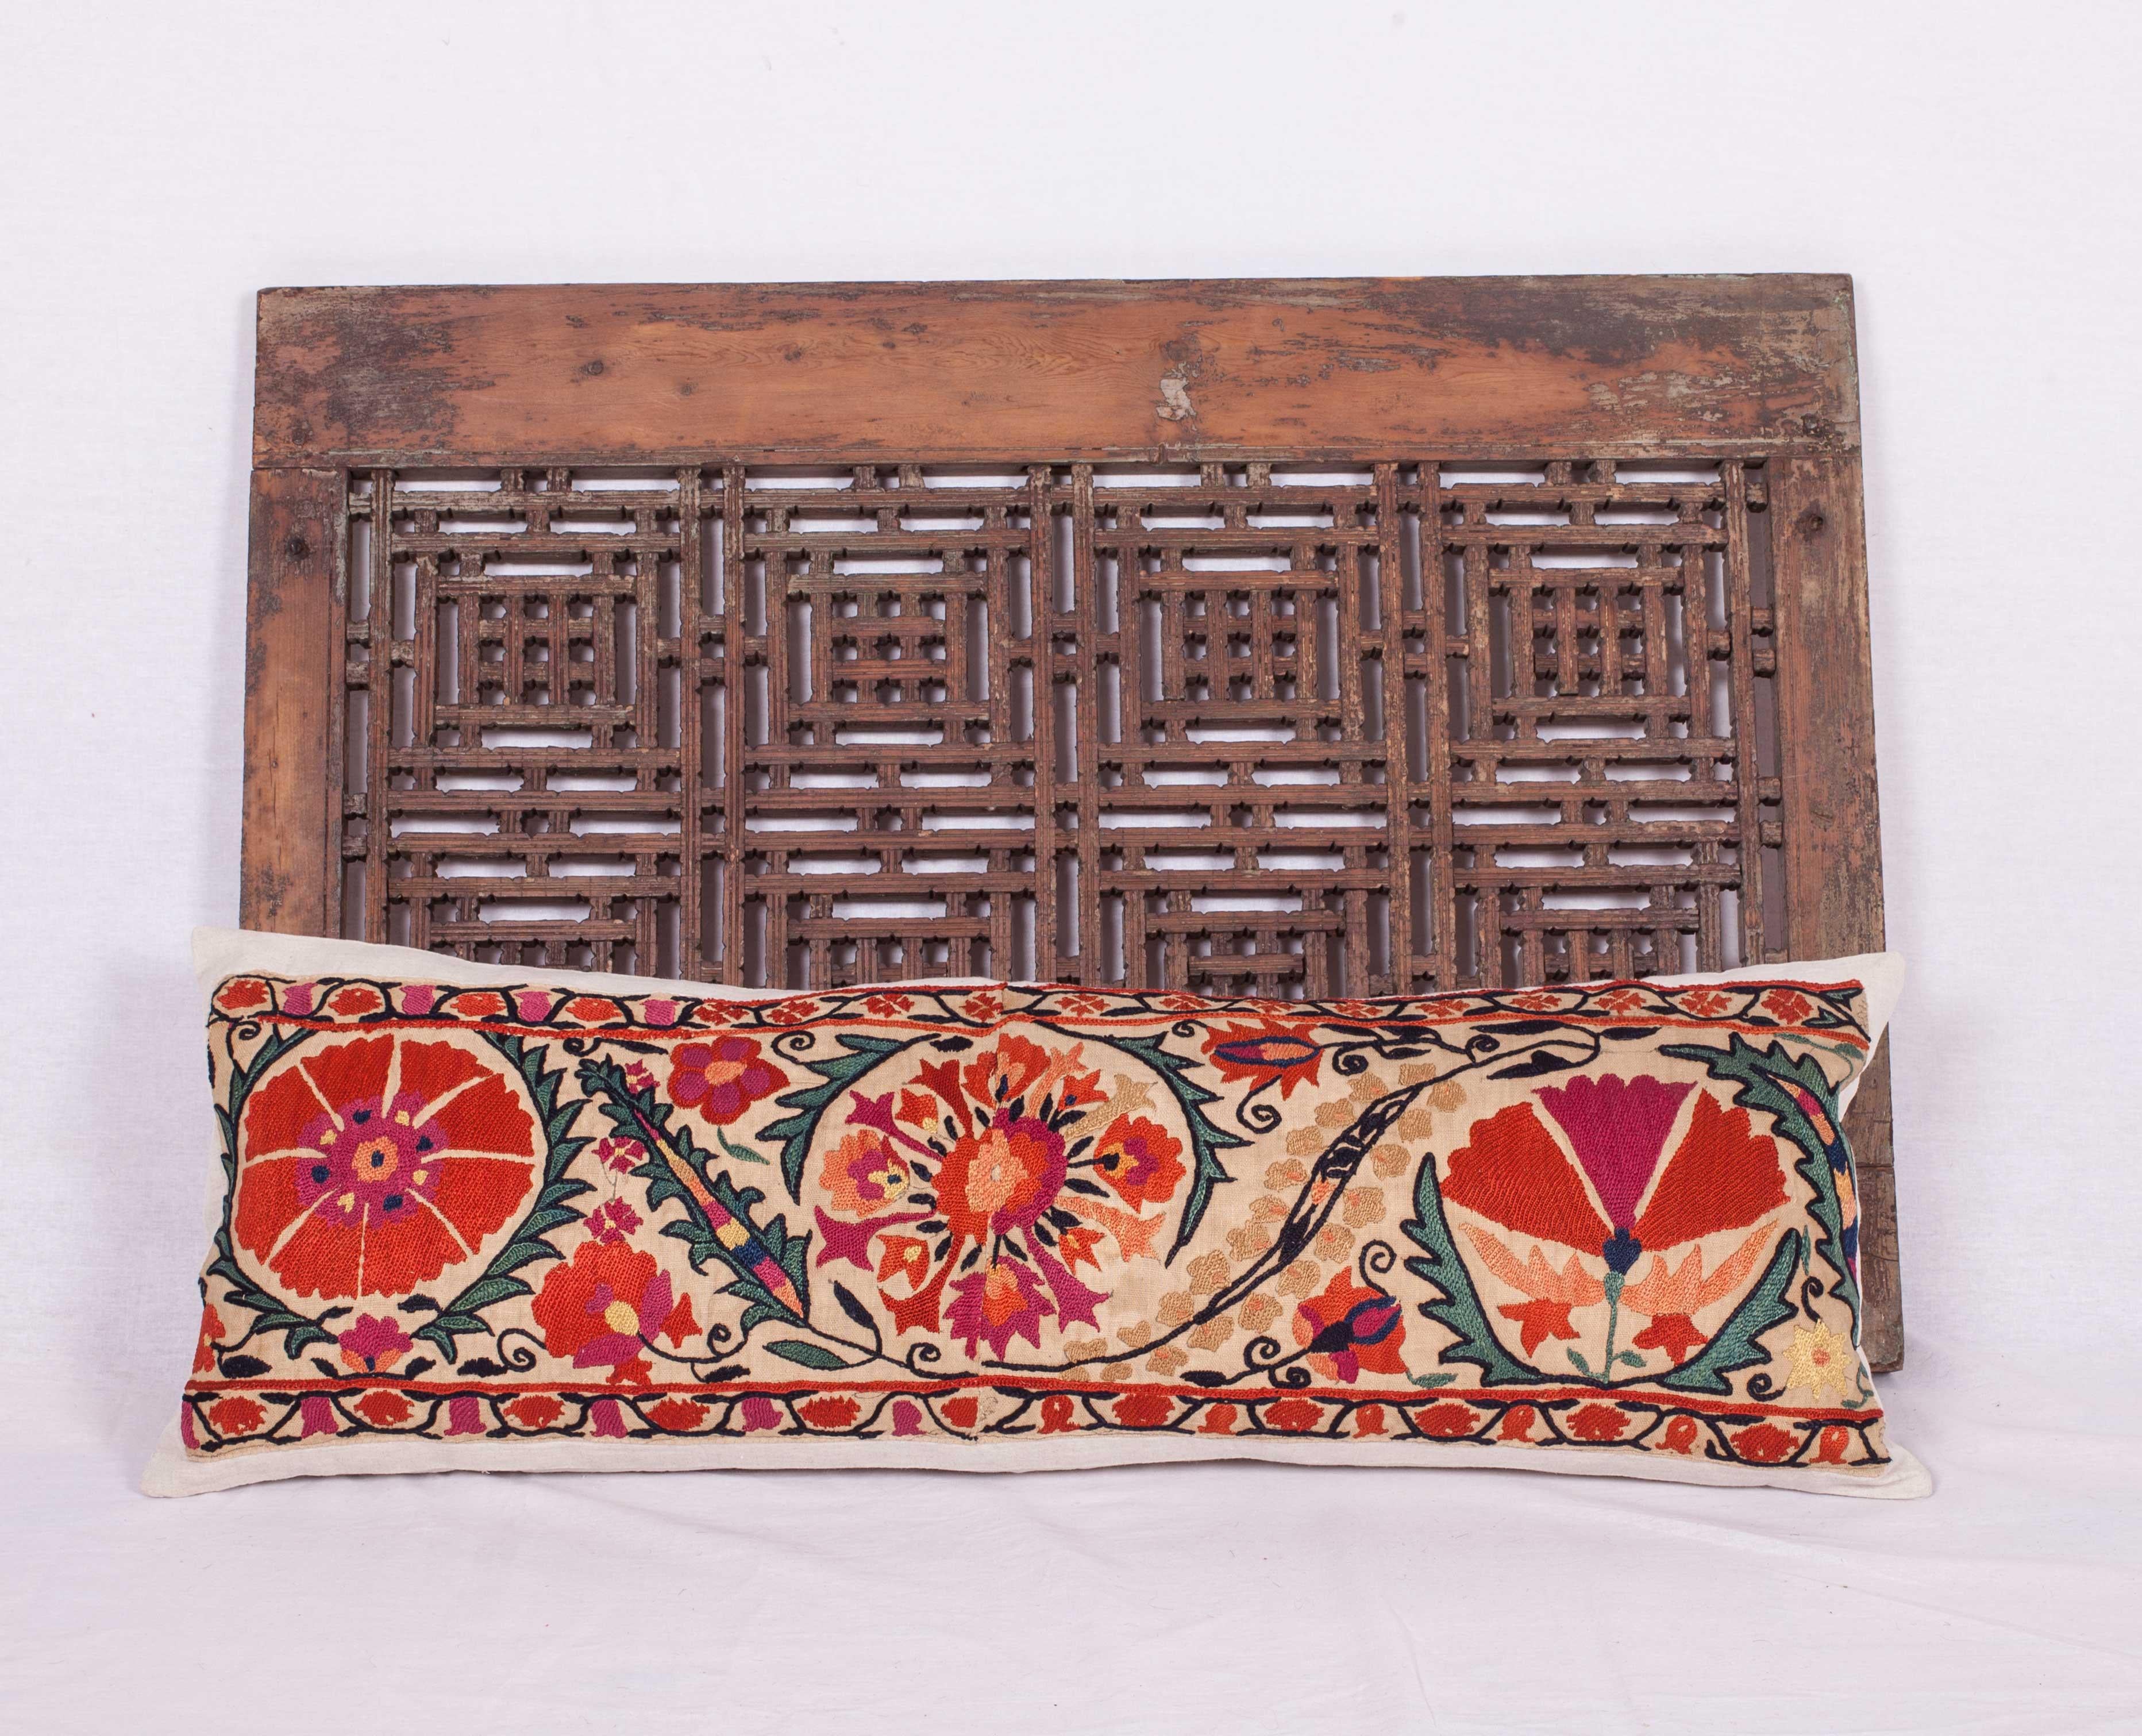 An excellent antique Suzani pillow made from the border of a mid-19th century or earlier Nurata Suzani. (Suzani fragment has been appliquéd on linen professionally and then converted into a pillow case so the embroidery is still intact just incase